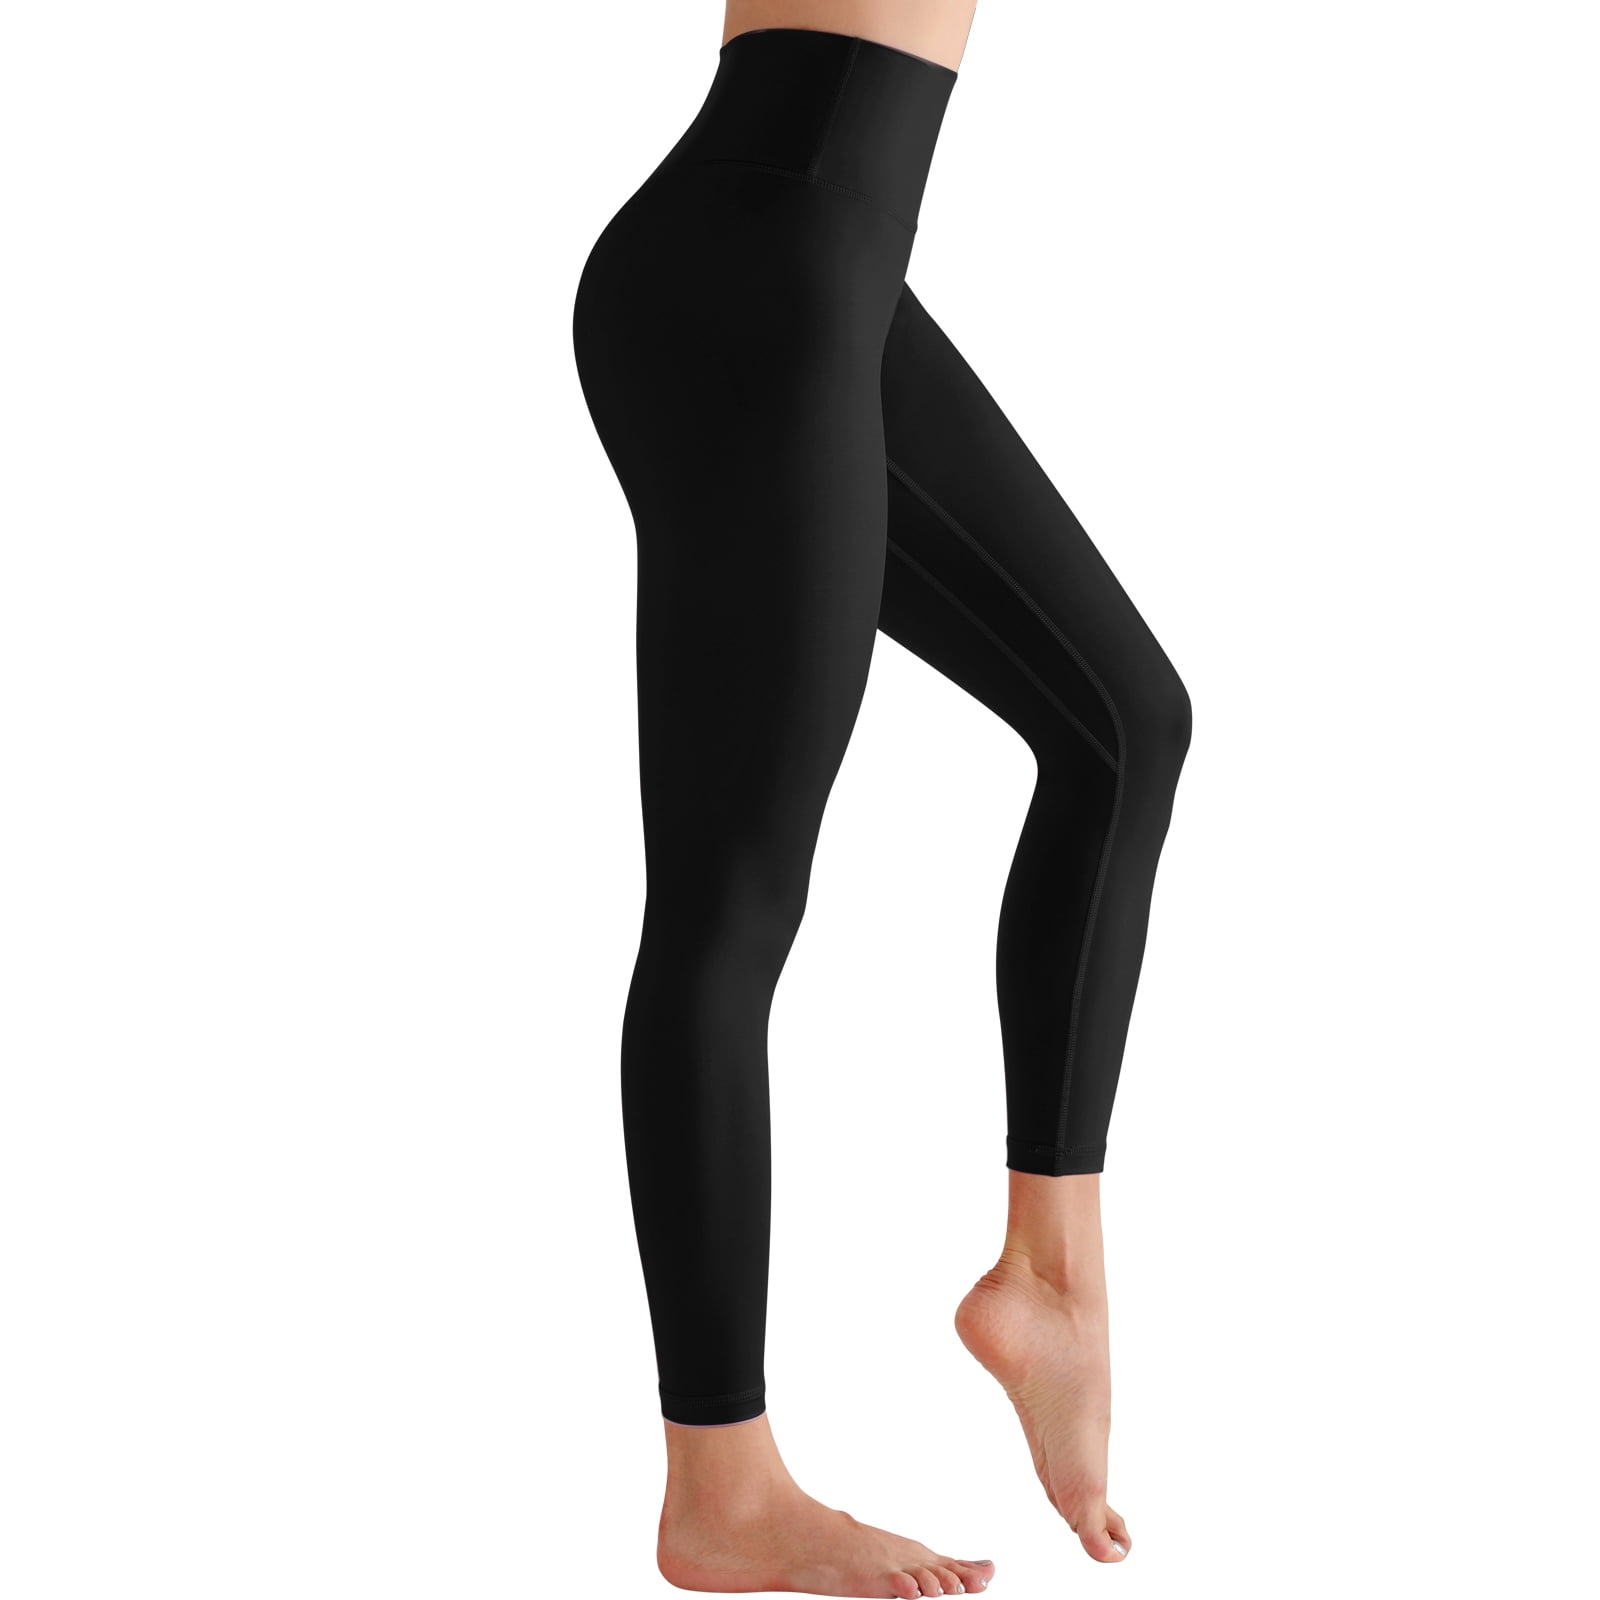 Discover more than 146 gym pants for girls best